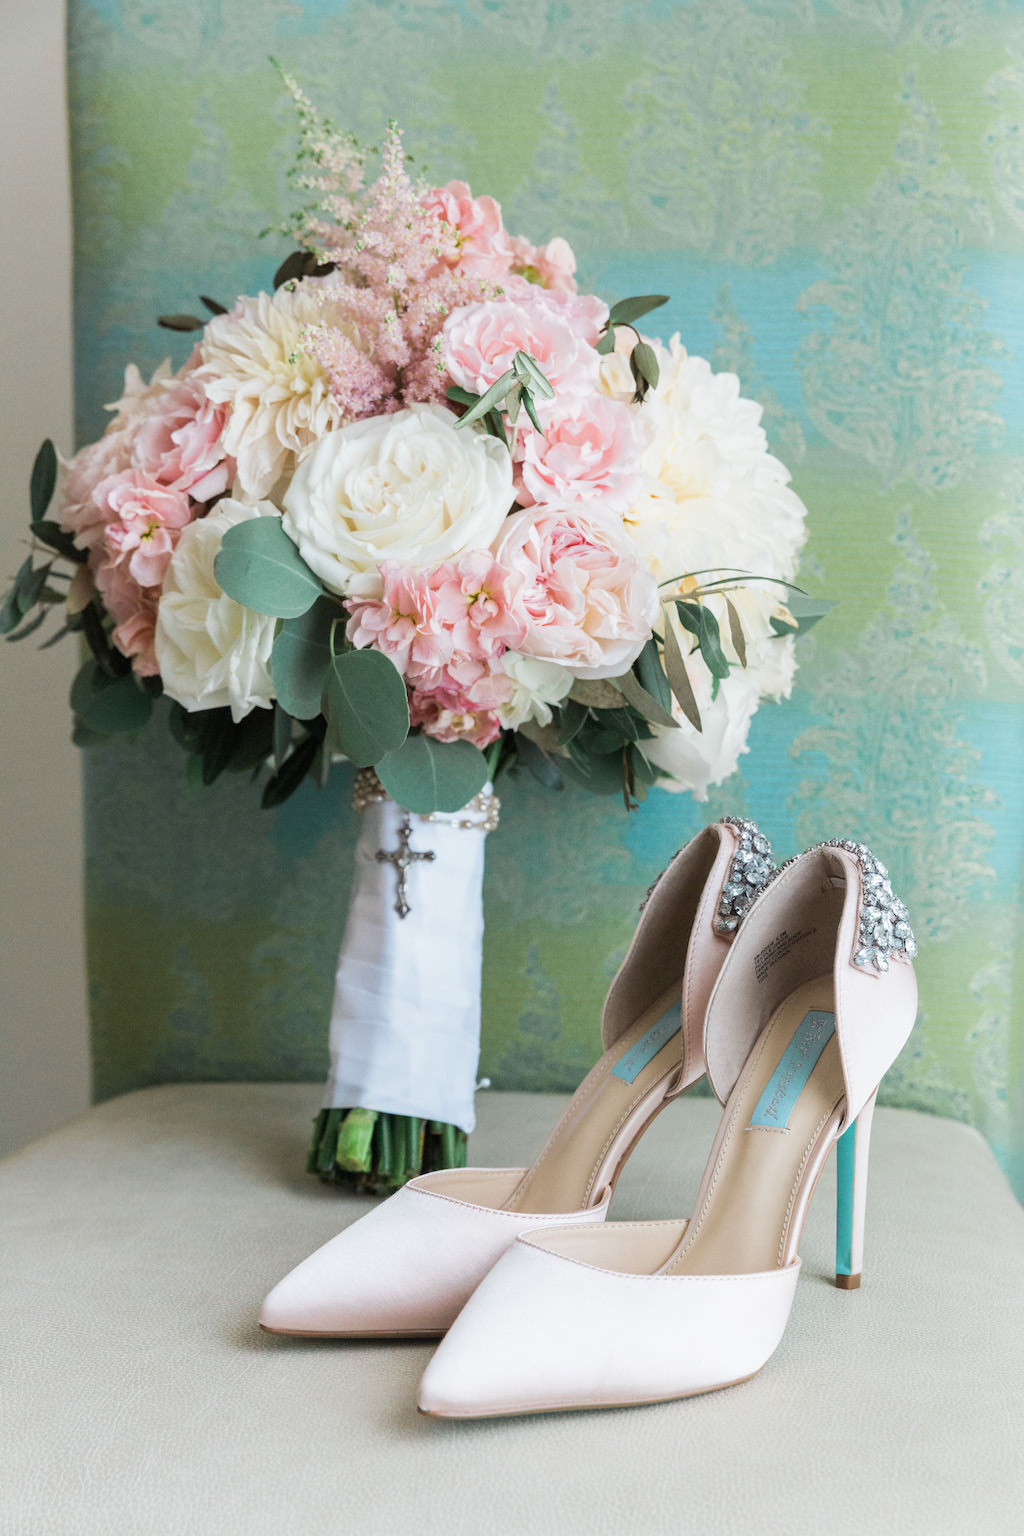 Pink Peony and WHite Floral with Greenery White Ribbon Wrapped Bridal Bouquet with Blush Pointed Toe and Rhinestone Heel Wedding Shoes